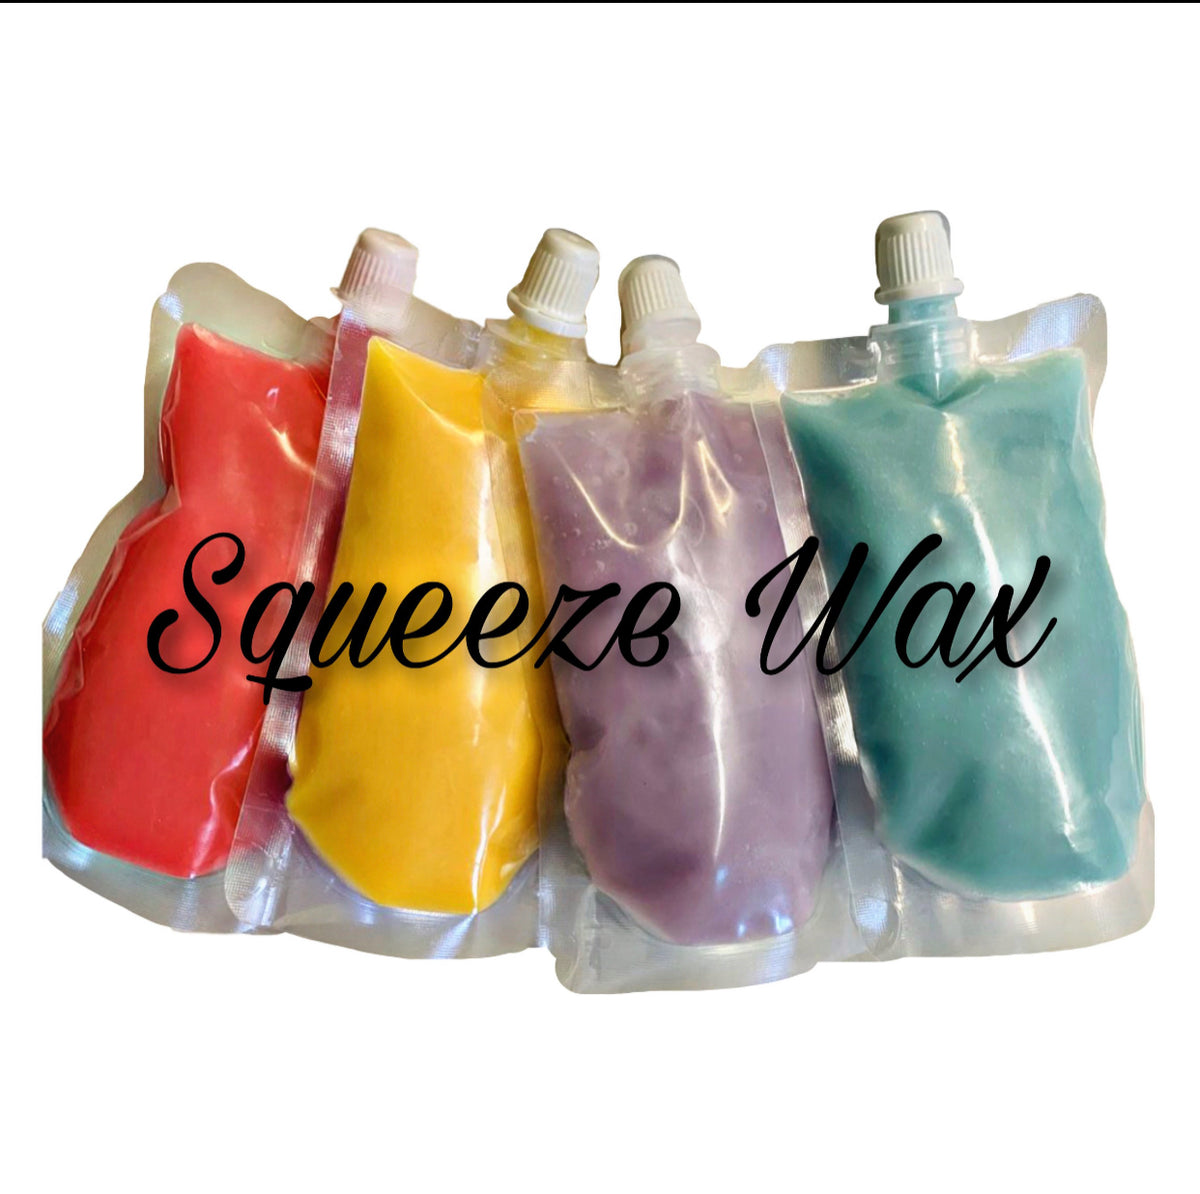 Squeeze wax – BareBumEssentials